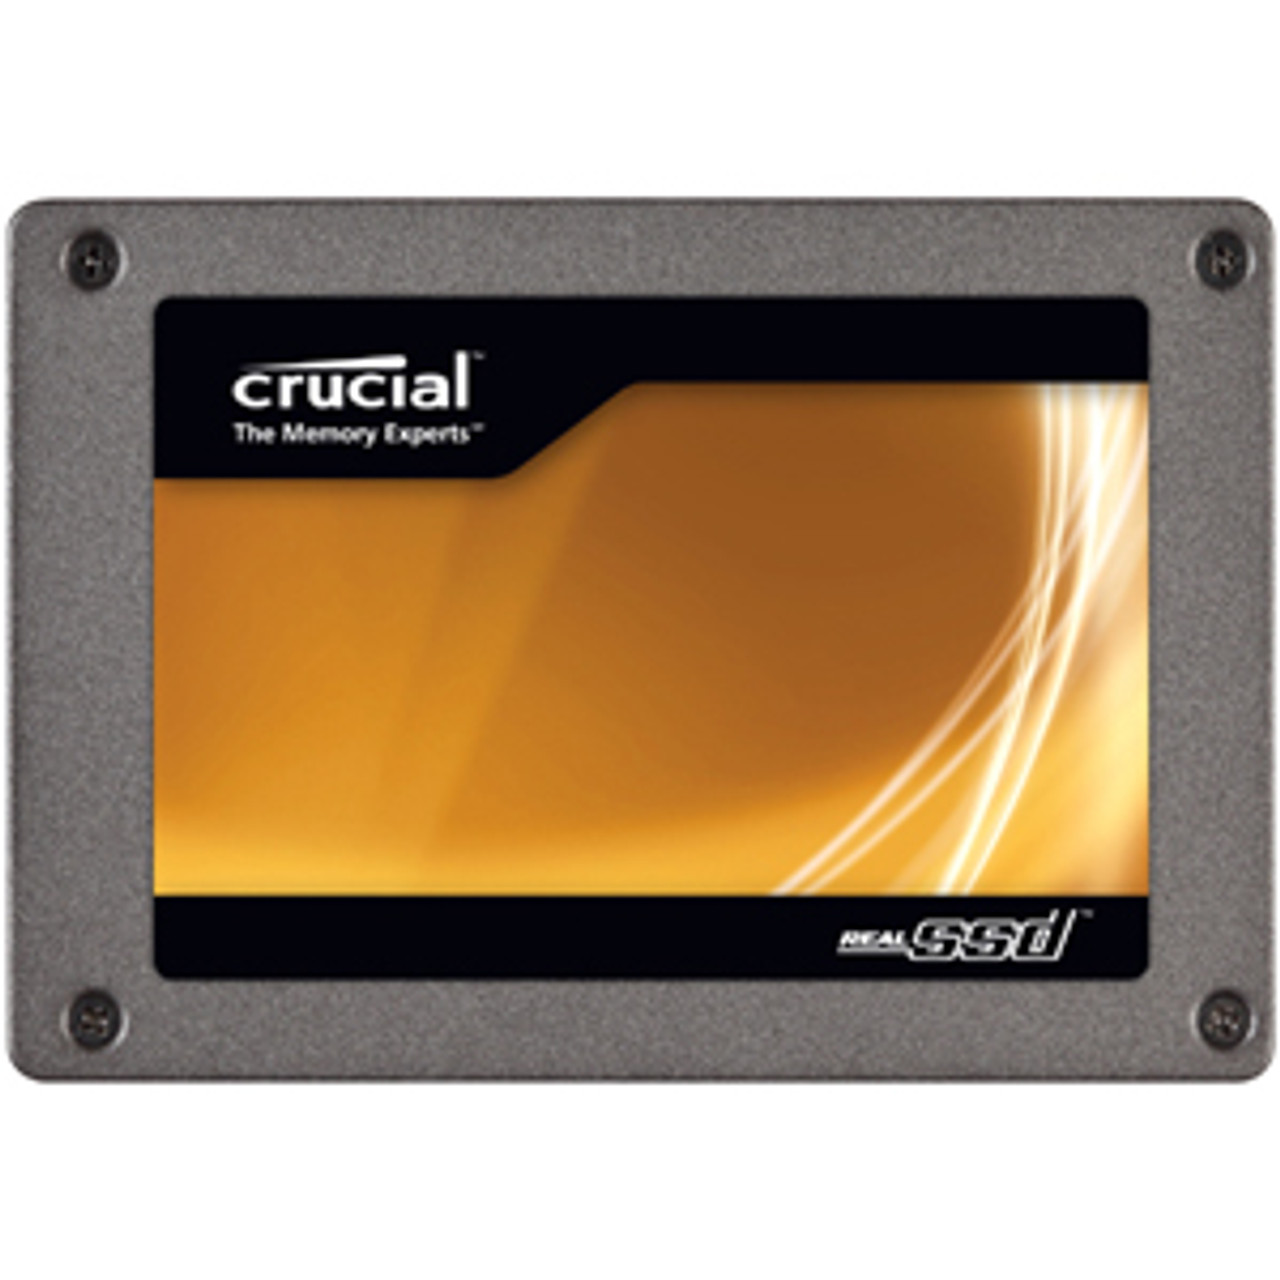 CTFDDAC128MAG-1G1 - Crucial RealSSD C300 128 GB Internal Solid State Drive - 2.5 - SATA/600 - Hot Swappable